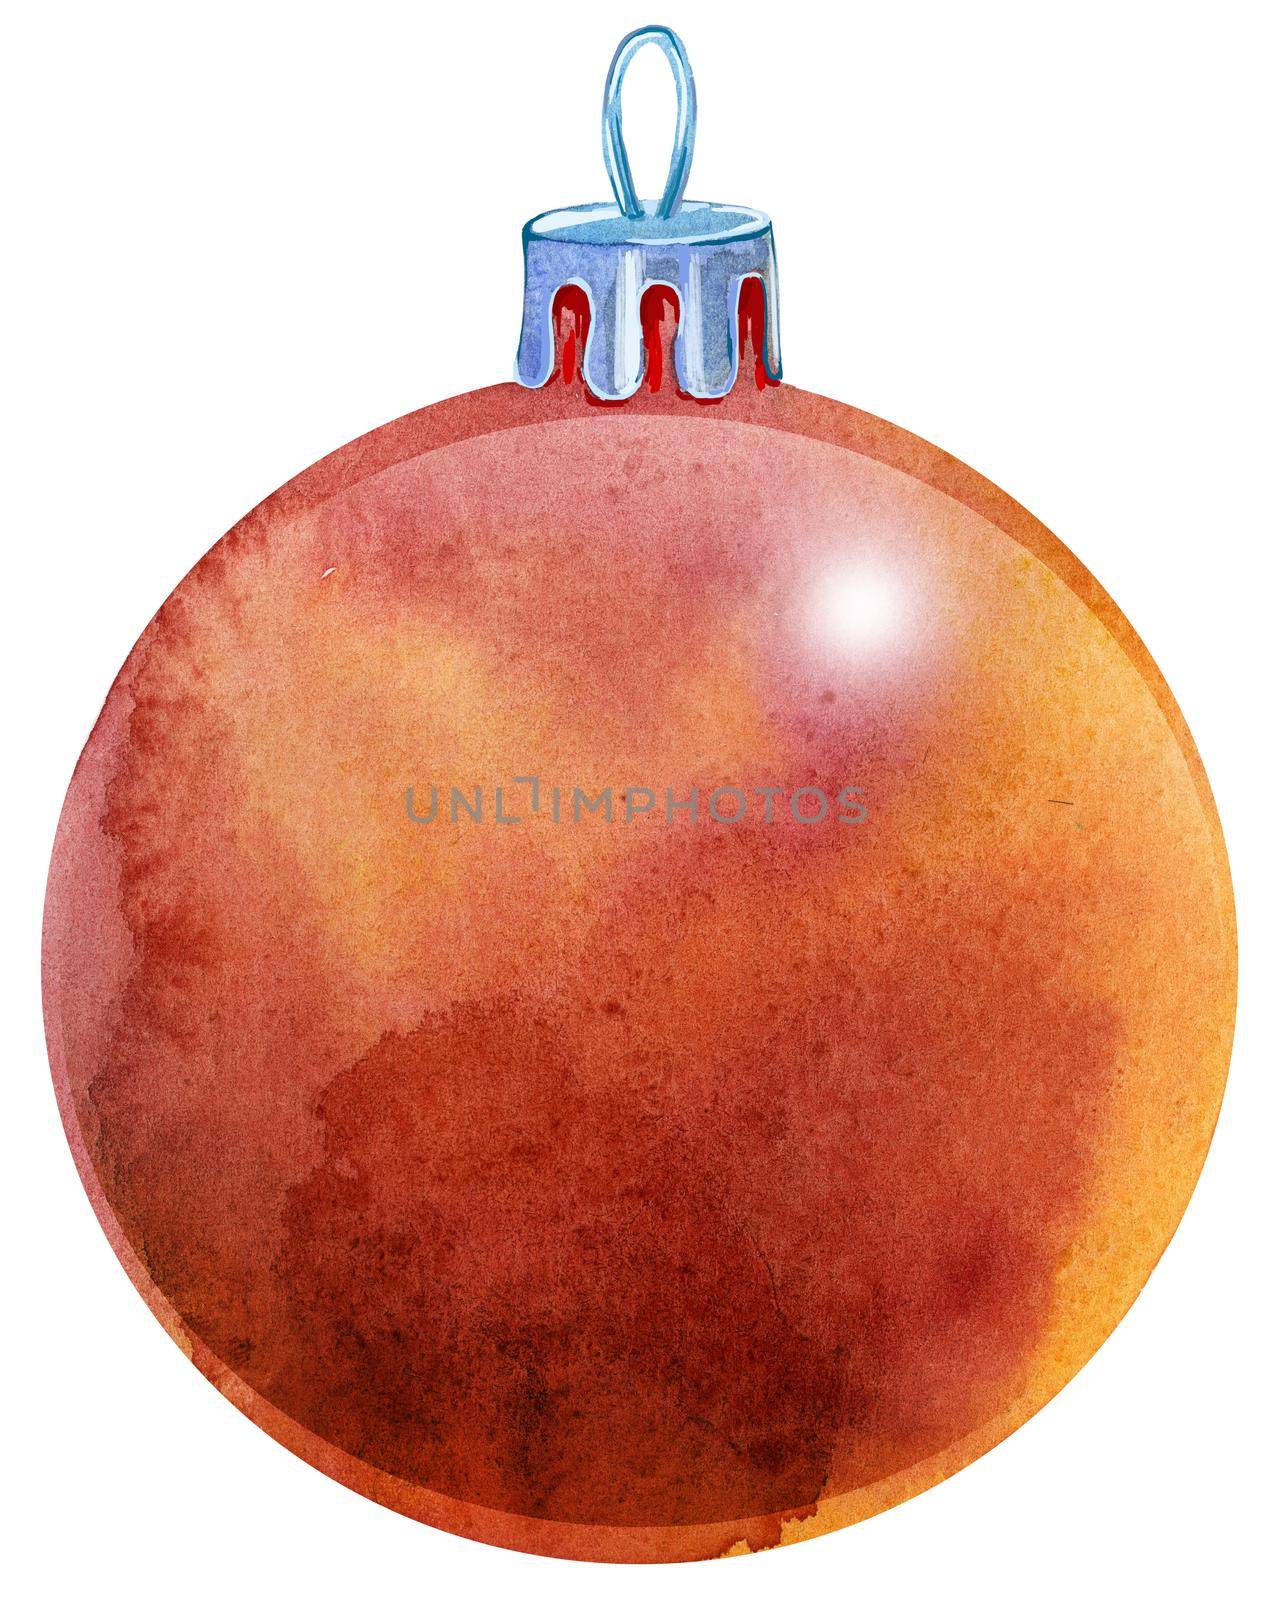 Watercolor Christmas red ball isolated on a white background.